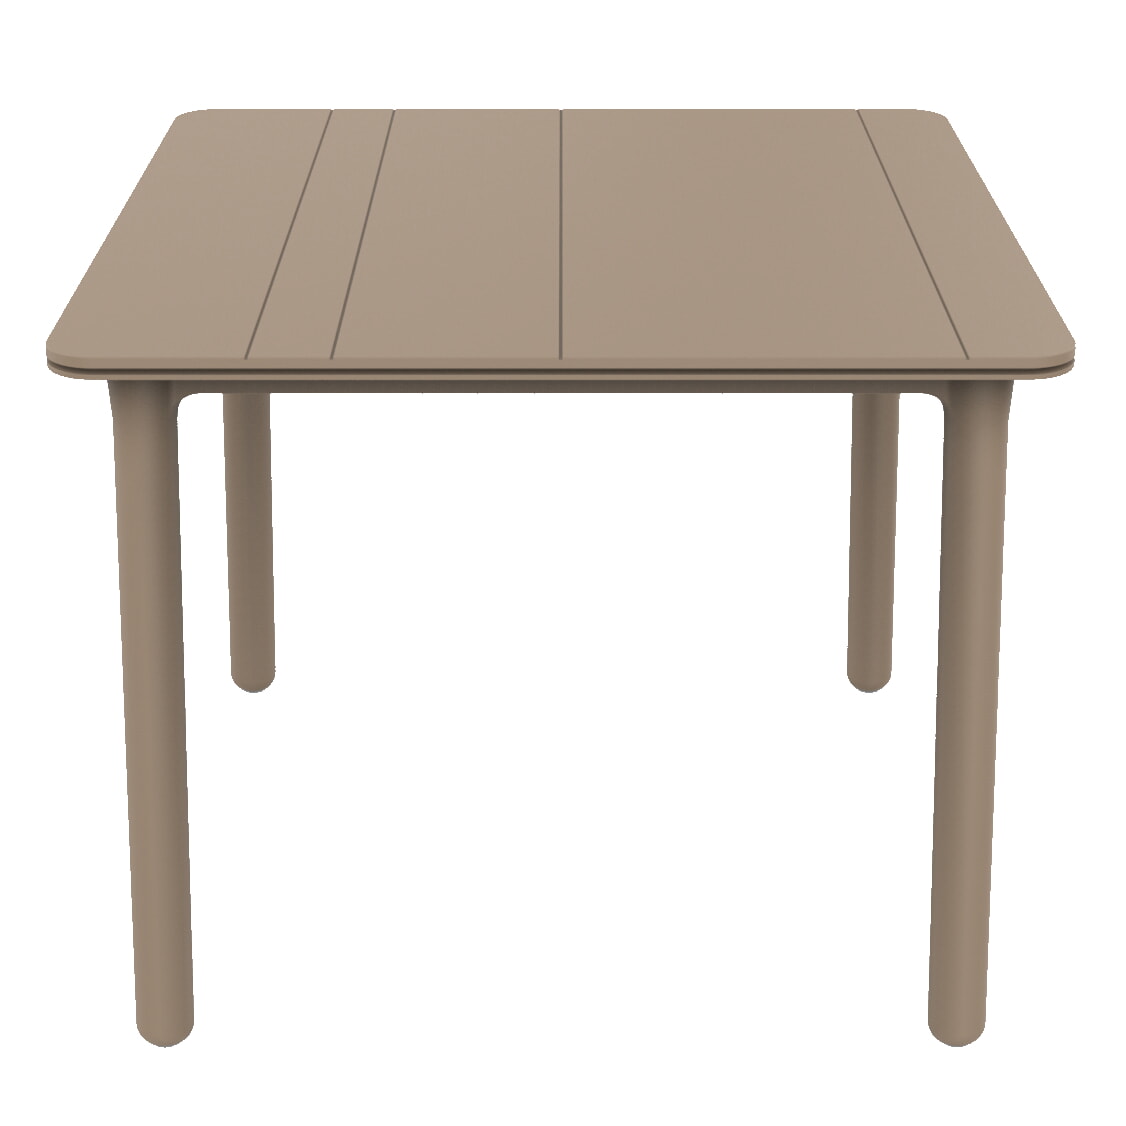 Garbar NOA square table indoors, outdoors 90x90 sand base -